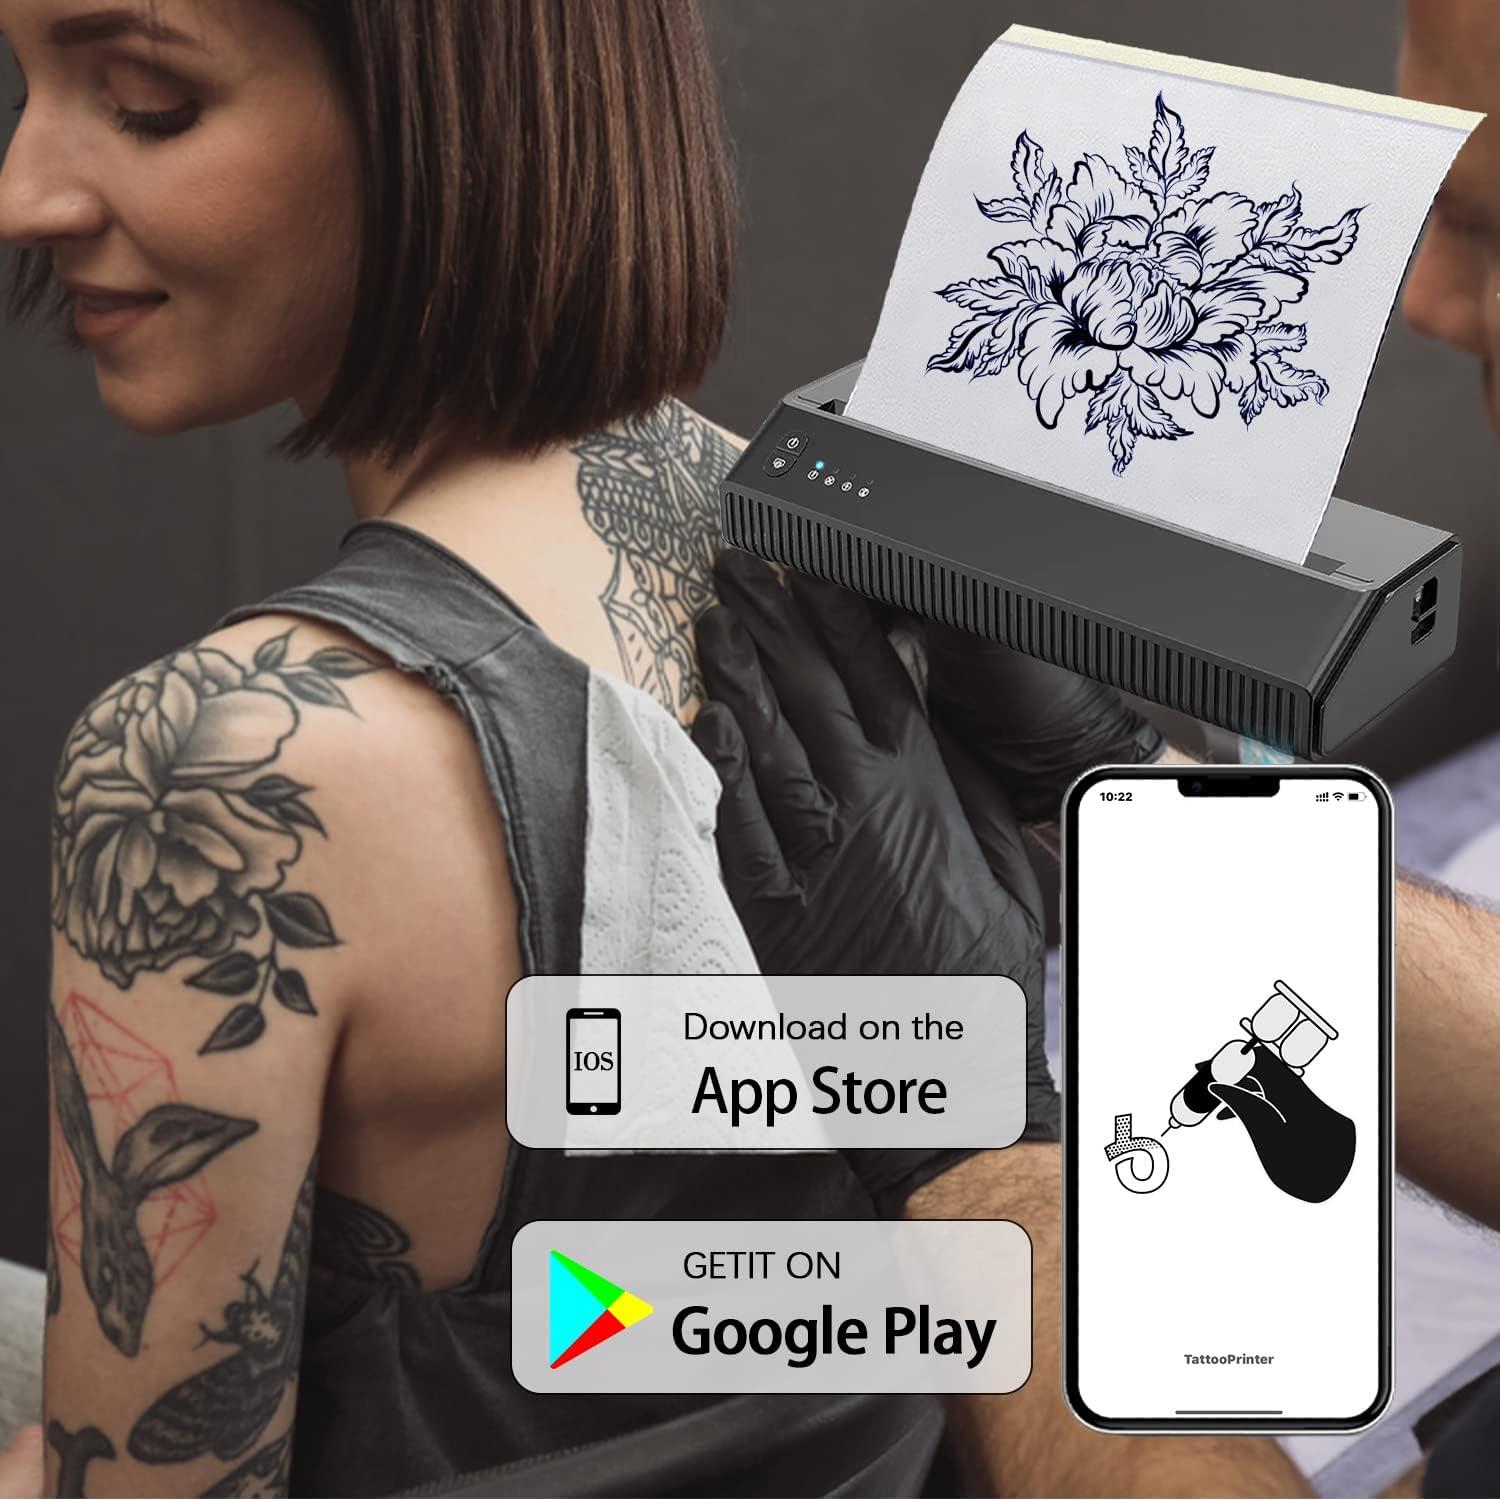 Walmeck USB Tattoos Printer Thermal Tattoos Pattern Stencil Machine APP  One-click Printing Compatible with Computers Cellphones and XPWin7810 PC  Tablets System - Walmart.com